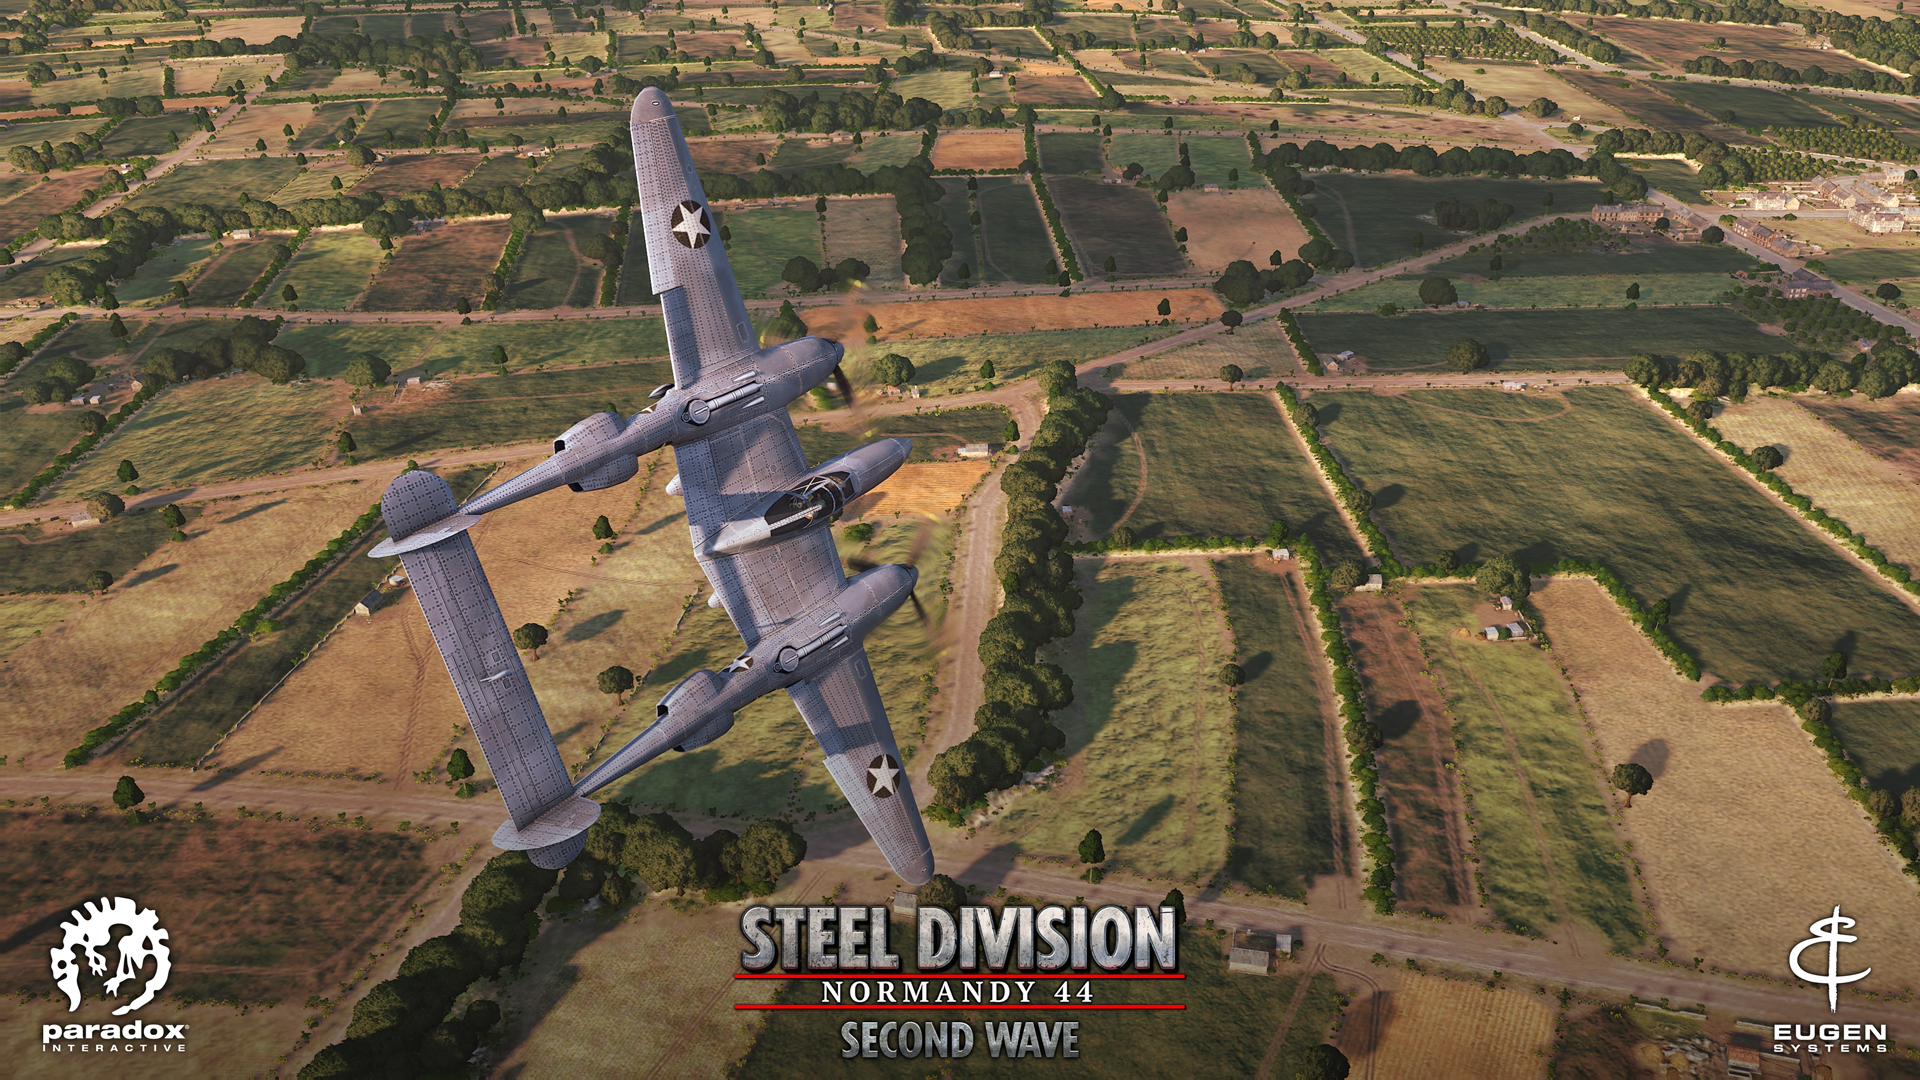 free download steel division normandy 44 second wave